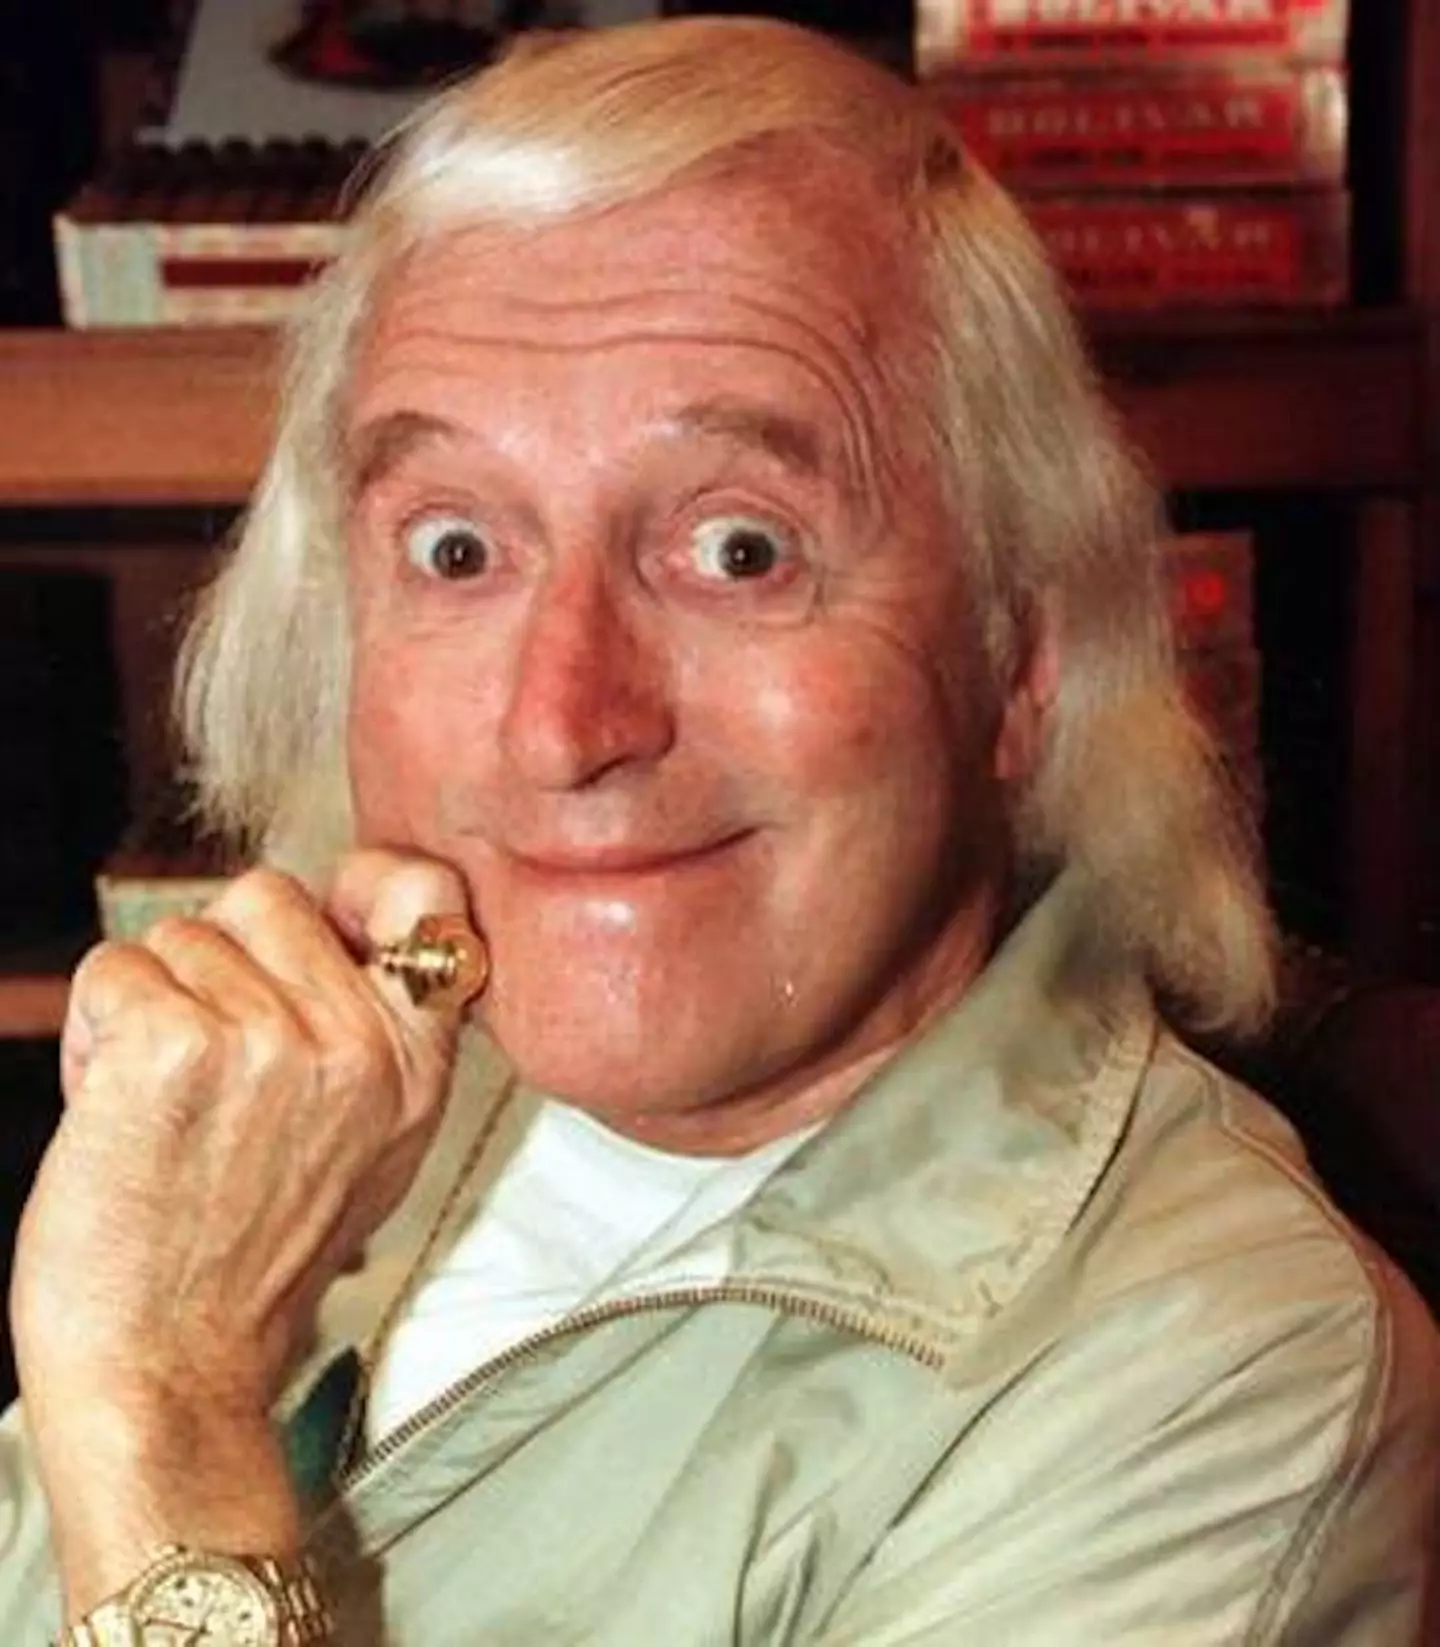 Jimmy Saville was able to get away with his sex crimes for his entire life.